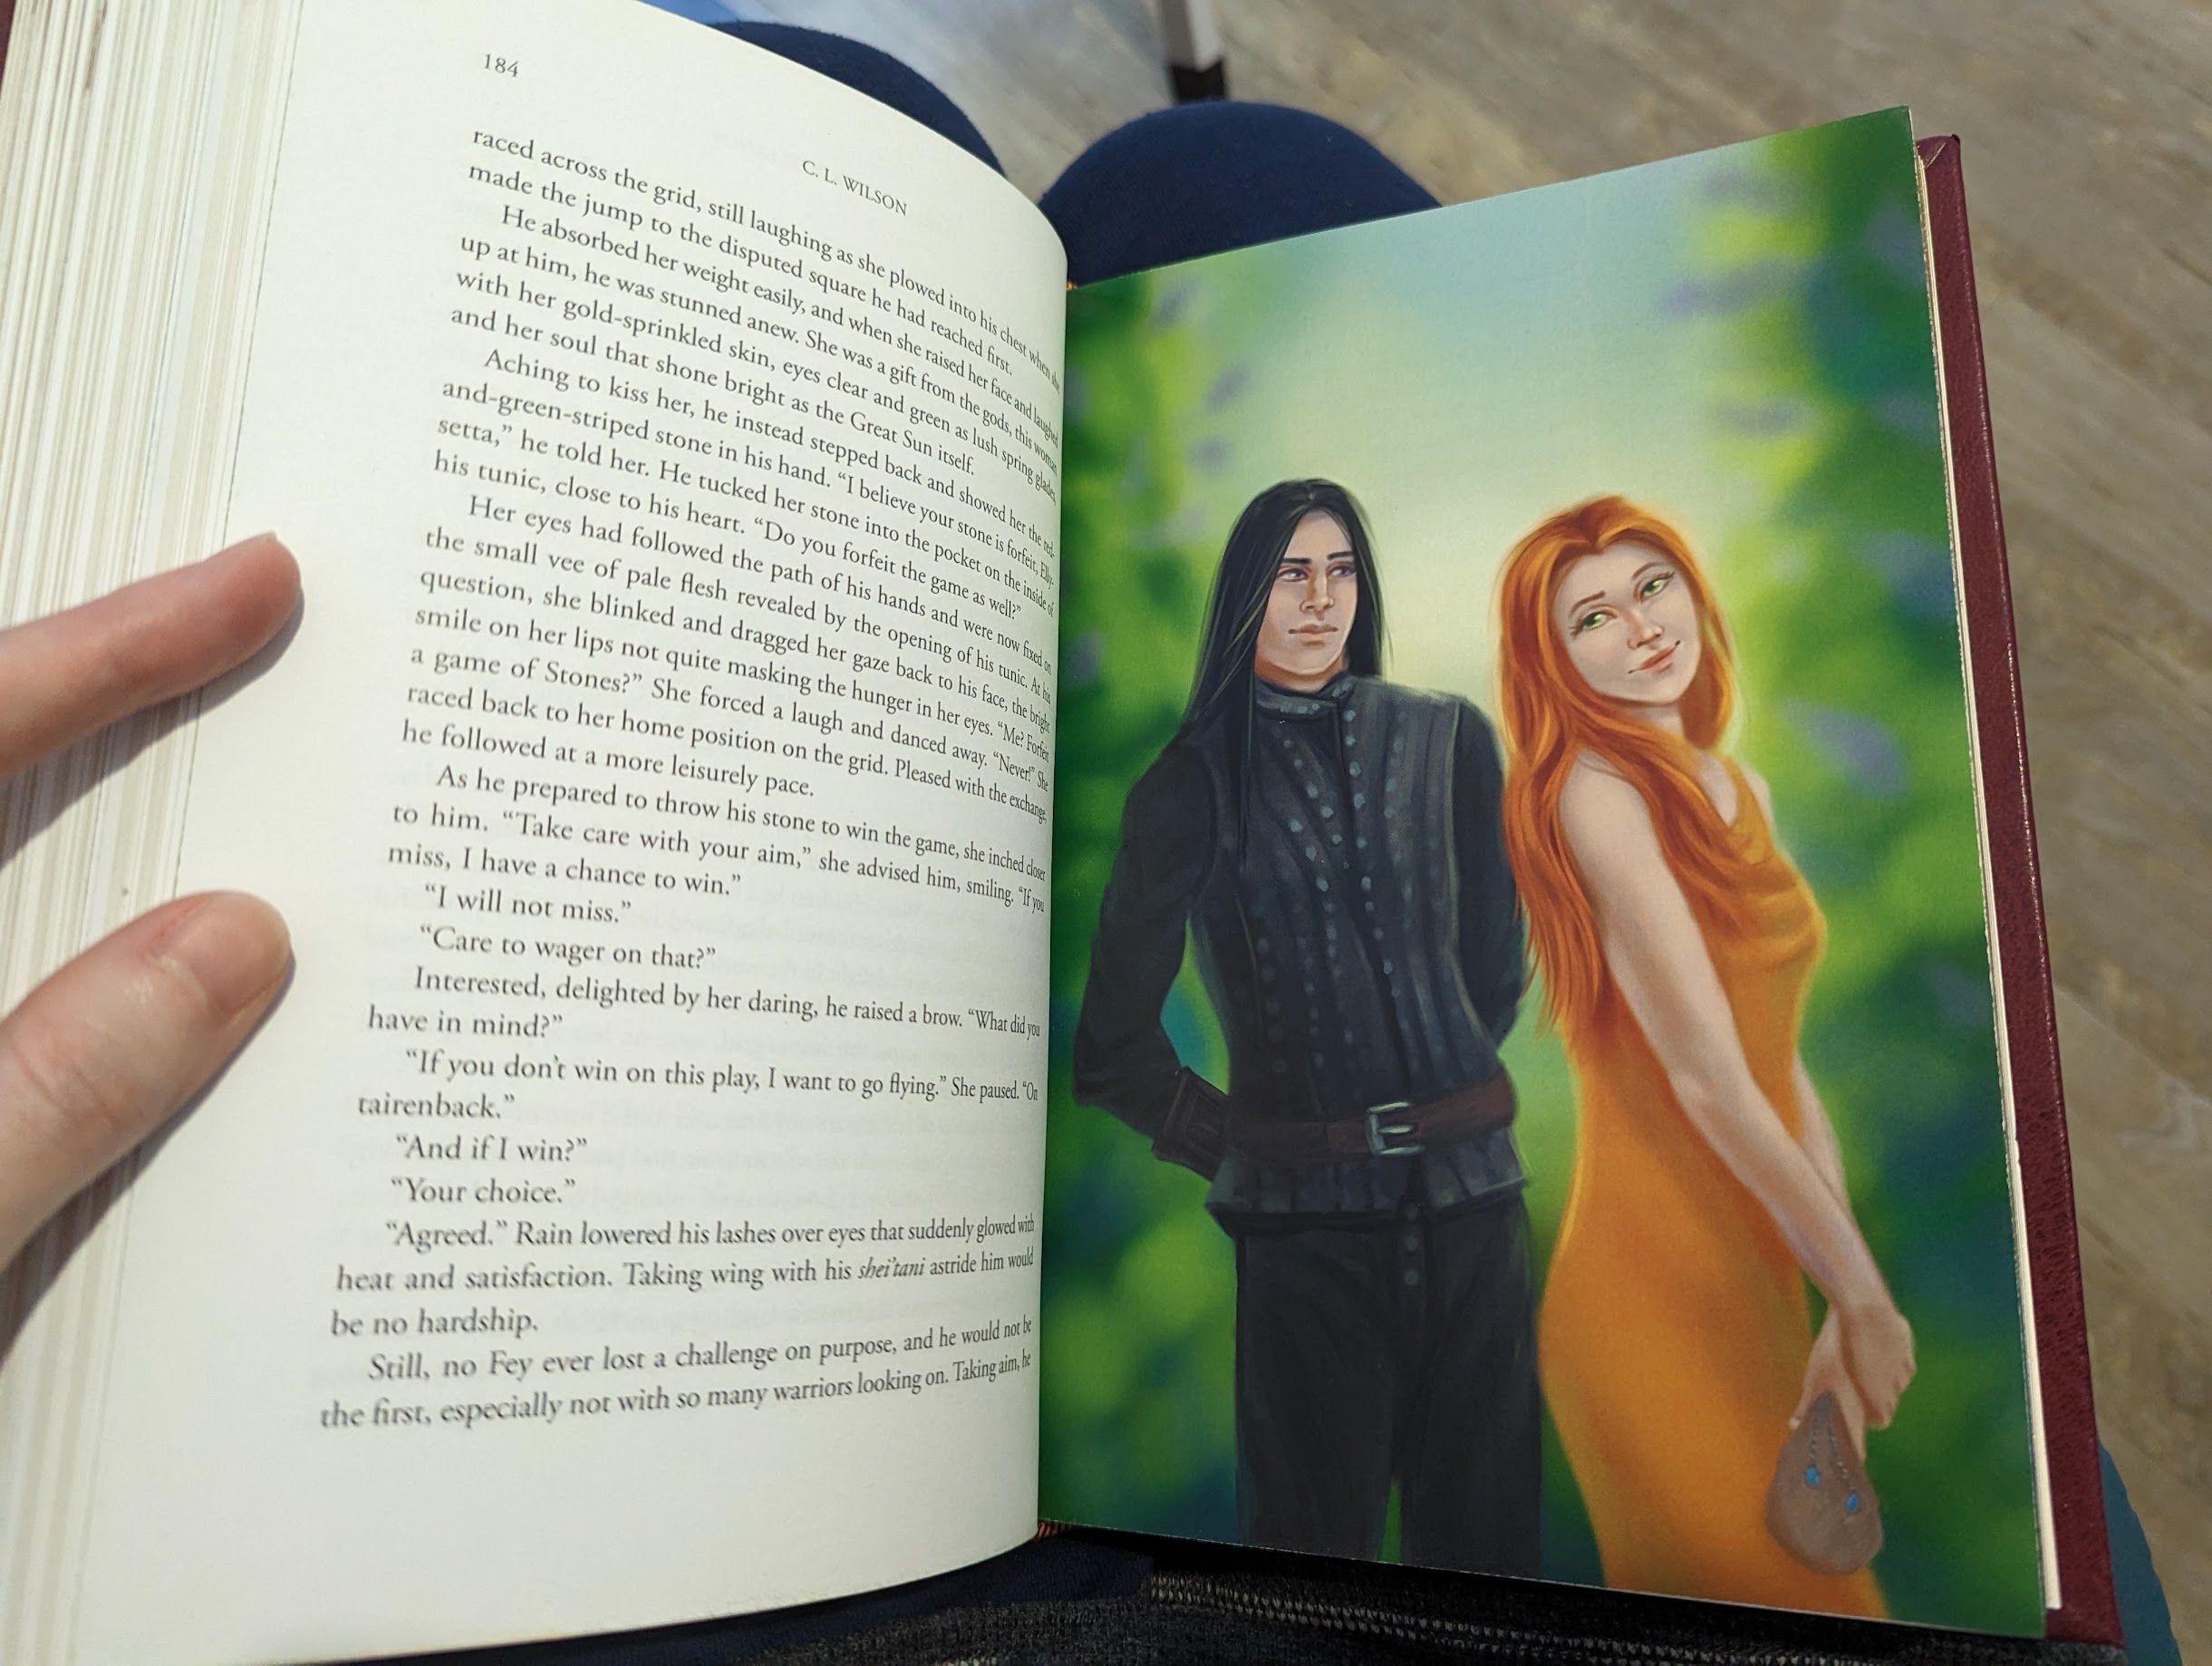 Photo of the interior of a book. On the left hand side is the text from the book. On the right is a full colour illustration of a man and woman. The woman has her back to the man, but her head tilted back a bit, as if she's teasing him. She's holding a small leather pouch in her hand. The man sort of looks like he's playfully rolling his eyes at her.